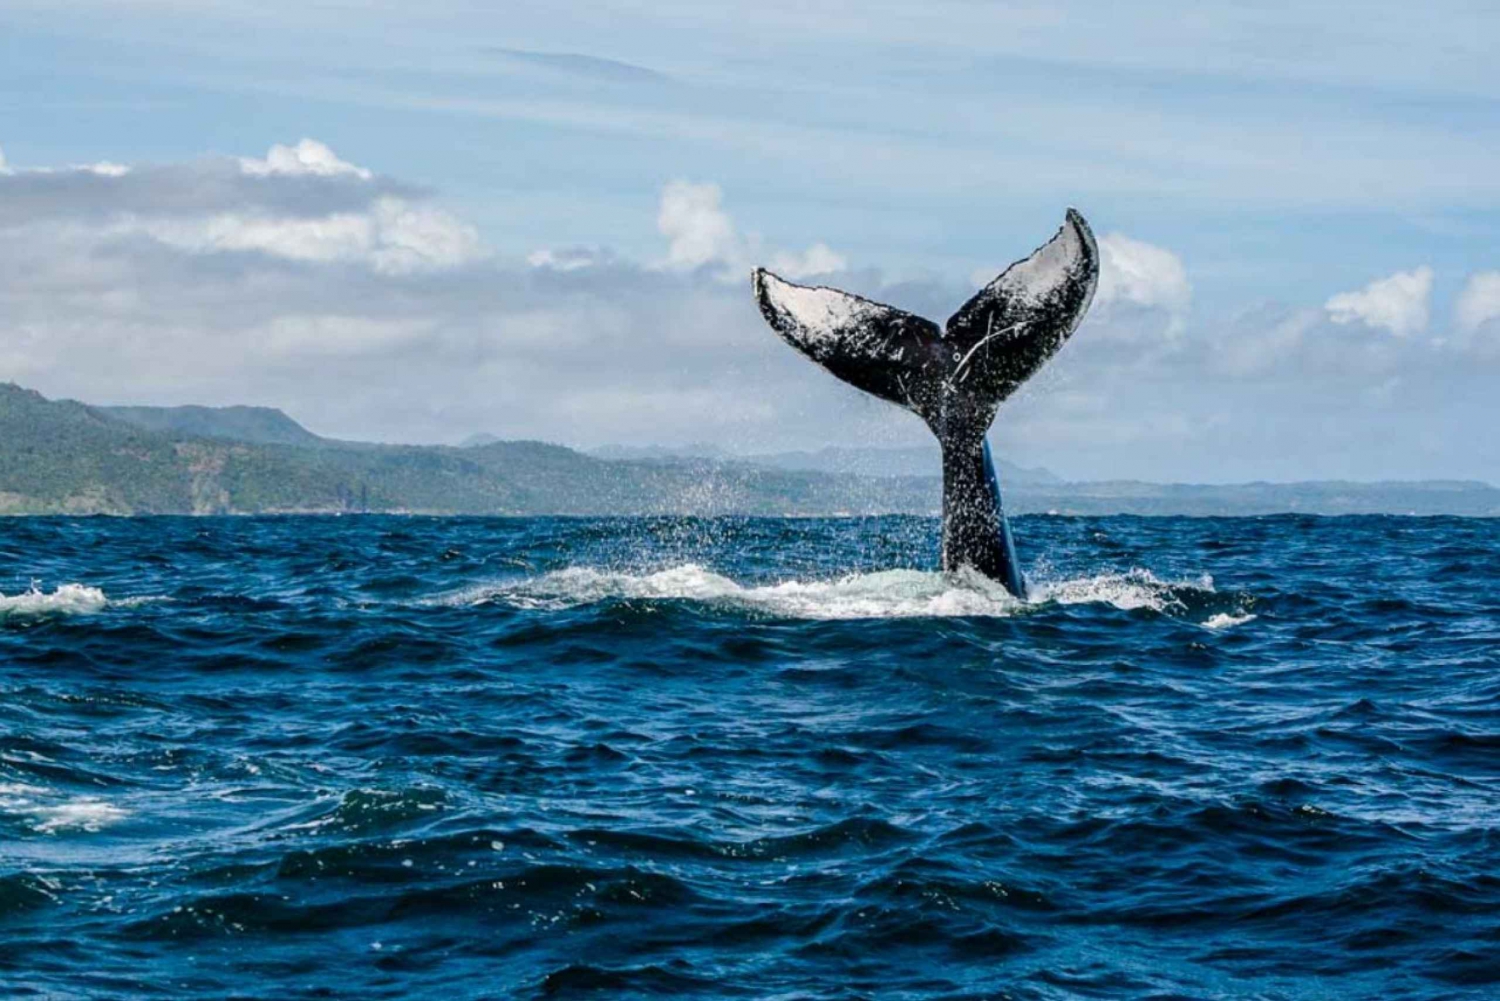 Samana: Private Whale Watching Half Day Trip